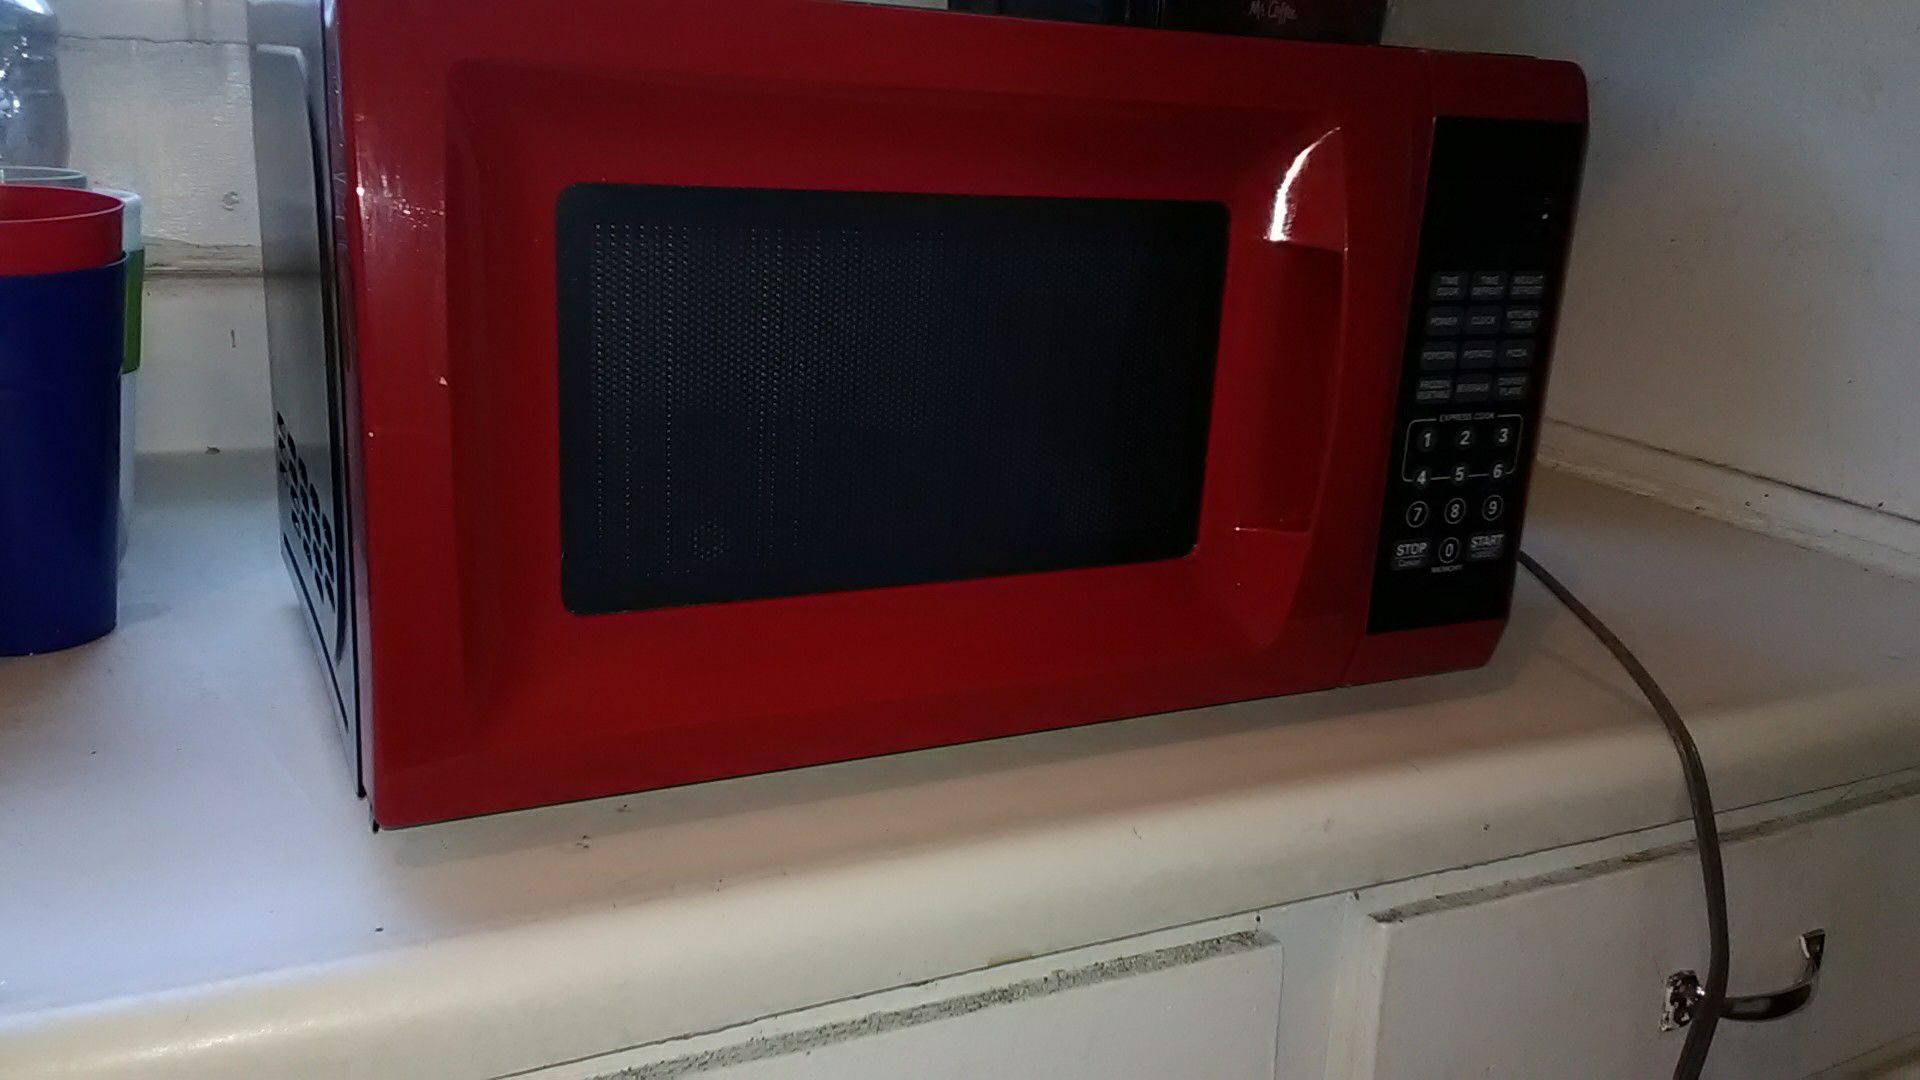 Newer /Used red microwave oven #FirstComeFirstServed